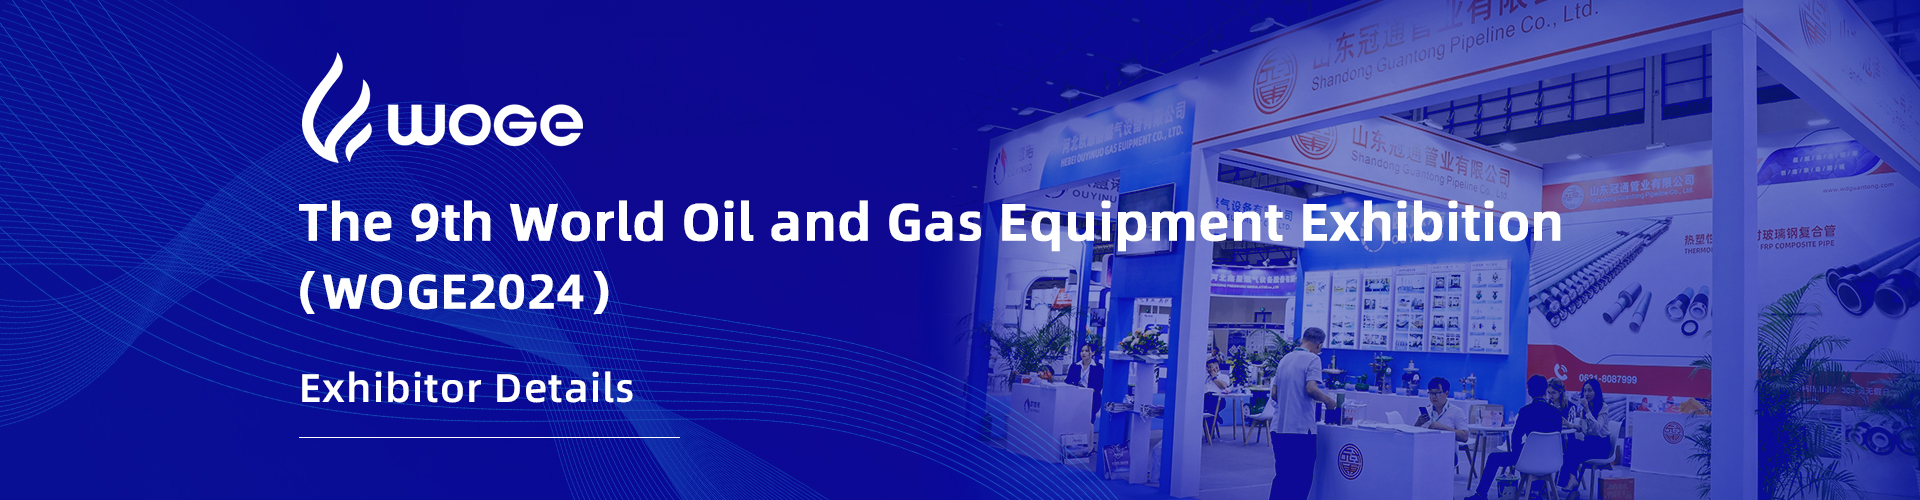 The 9th World Oil and Gas Equipment Exhibition (WOGE2024)